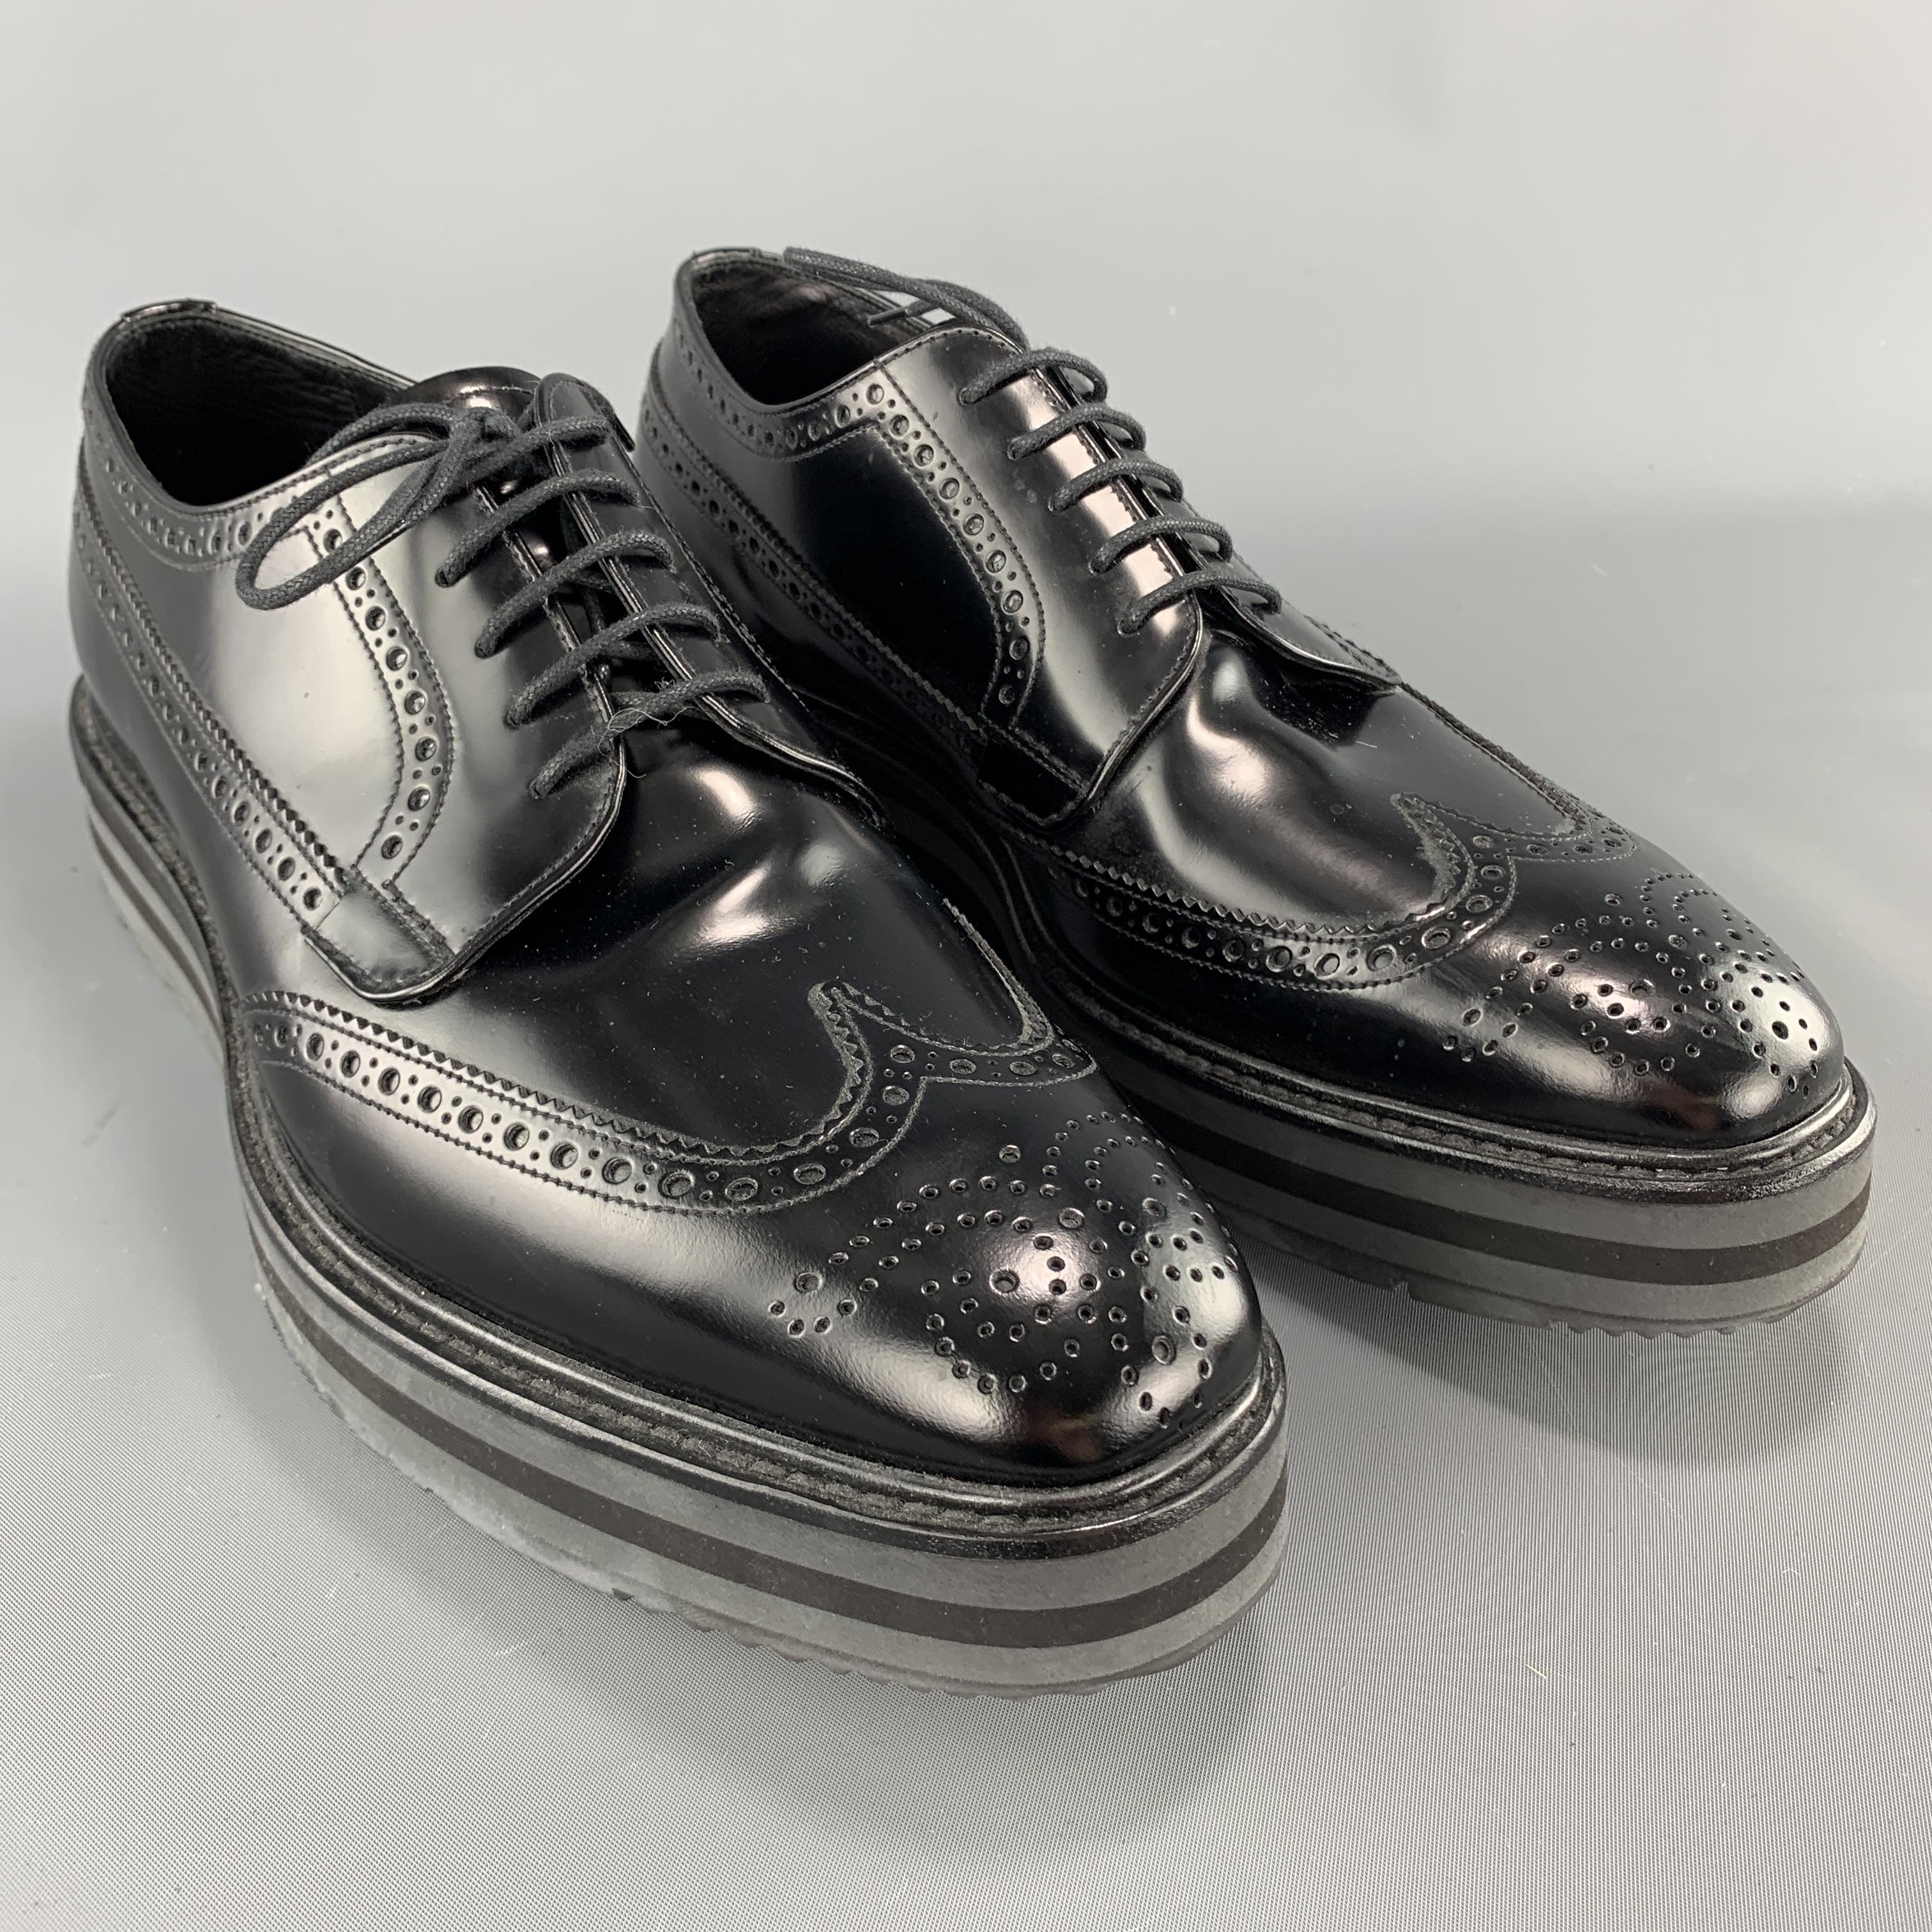 PRADA dress shoes come in smooth black leather with a wingtip toe, perforated brogueing  throughout, and striped platform rubber sole. Made in Italy.

Excellent Pre-Owned Condition.
Marked: UK 8

Outsole: 12.5 x 4.25 in.
Platform: 1.5 in.